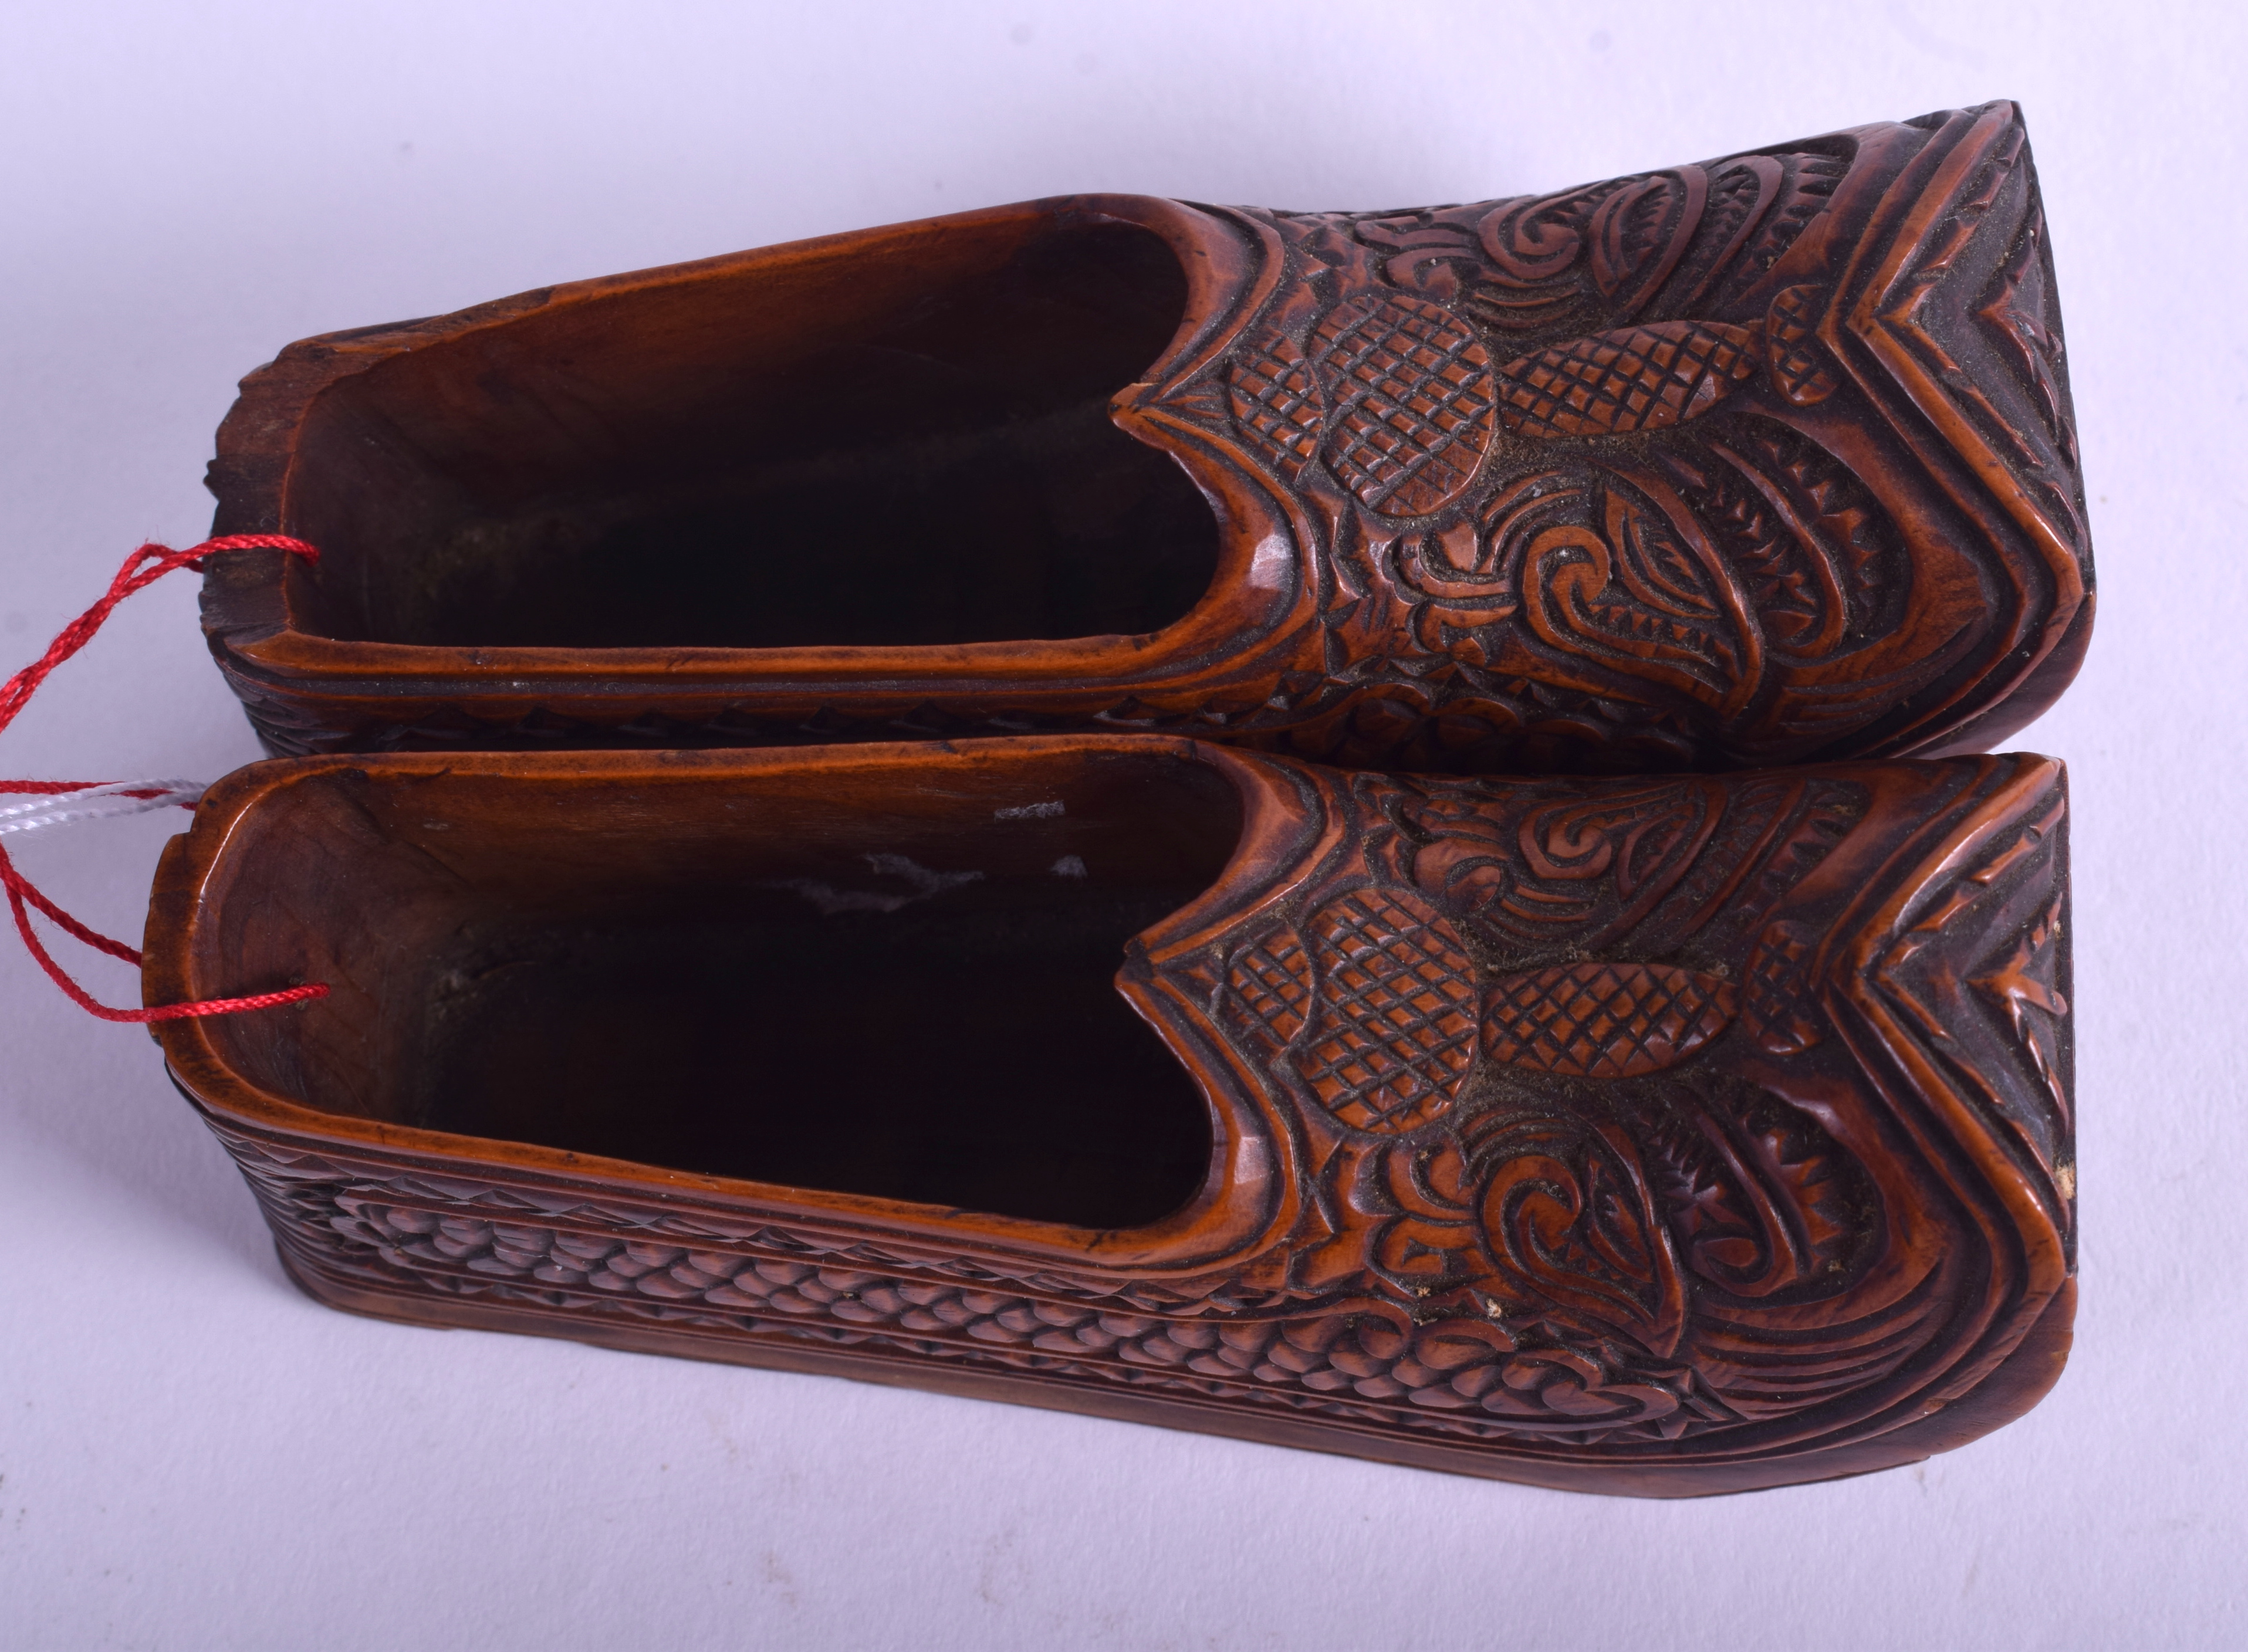 A PAIR OF 19TH CENTURY CONTINENTAL FRUITWOOD CLOGS carved with motifs. 8 cm long. - Image 3 of 4